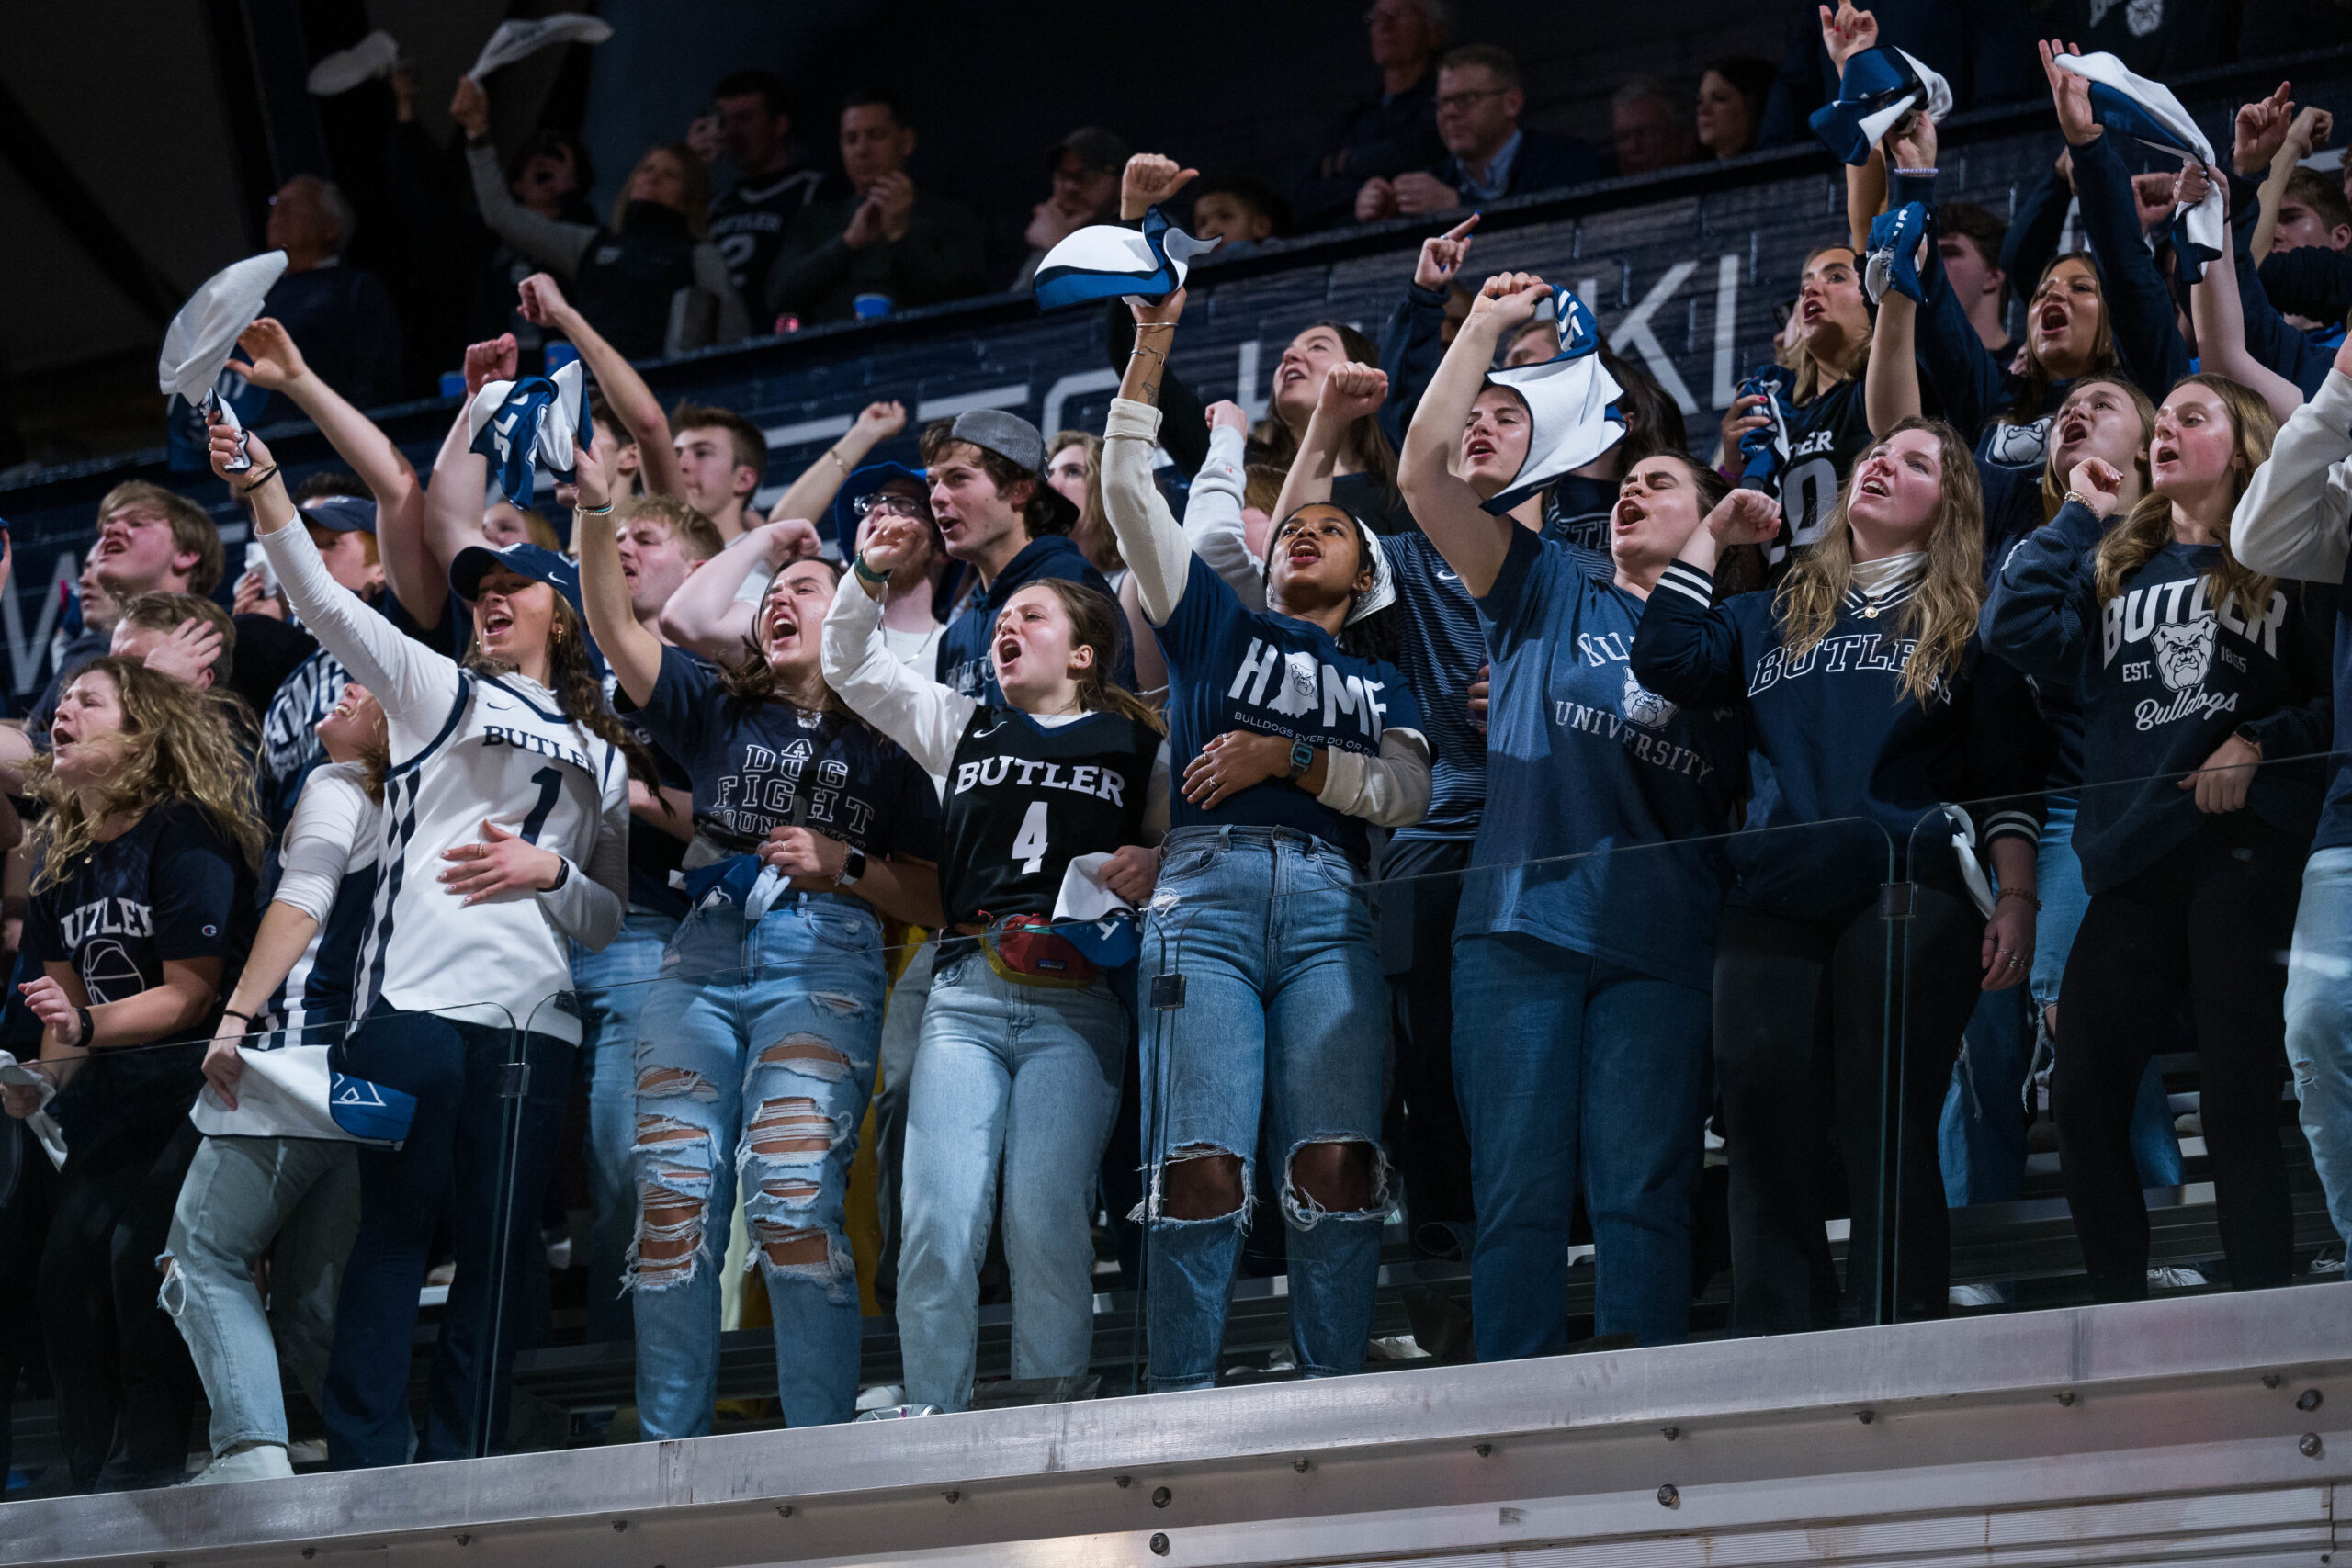 Students cheering at Butler basketball game in Hinkle Fieldhouse